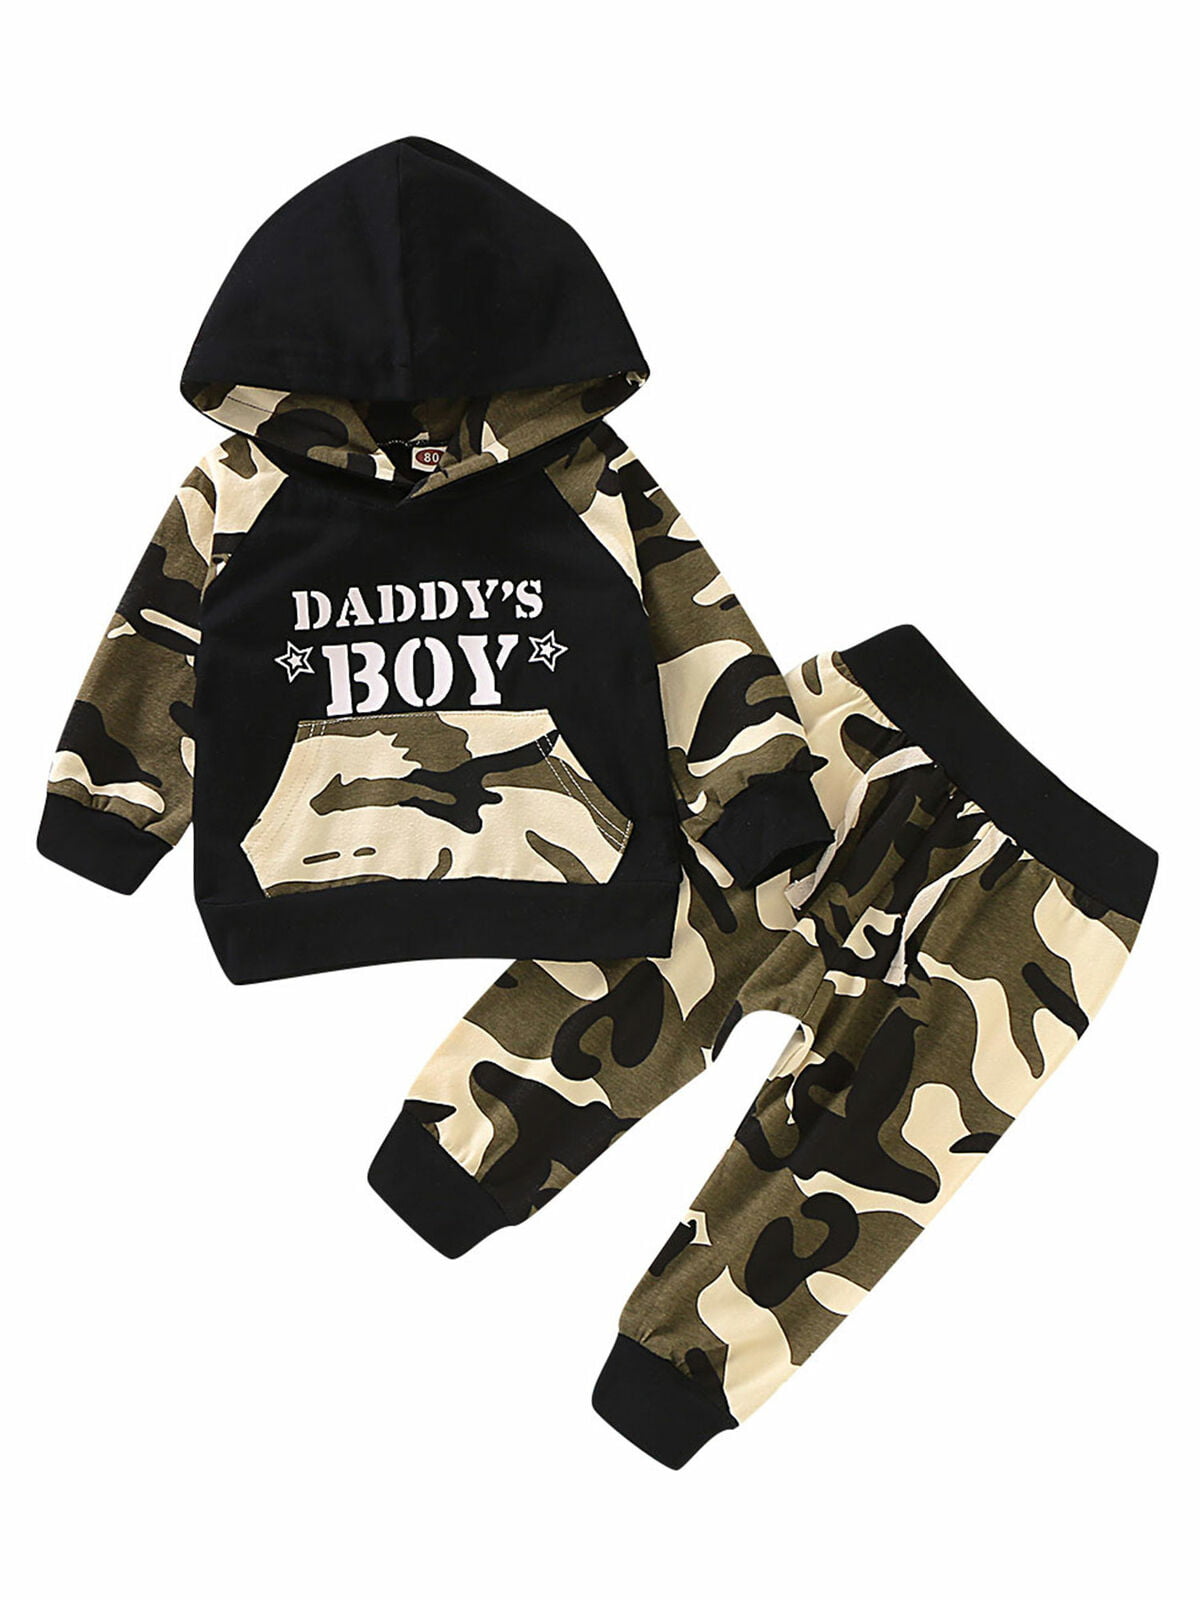 Toddler Baby Girls Camouflage Clothes Short Sleeve Zipper Hooded Jacket Tops+Long Pants 2PCS Outfits Set